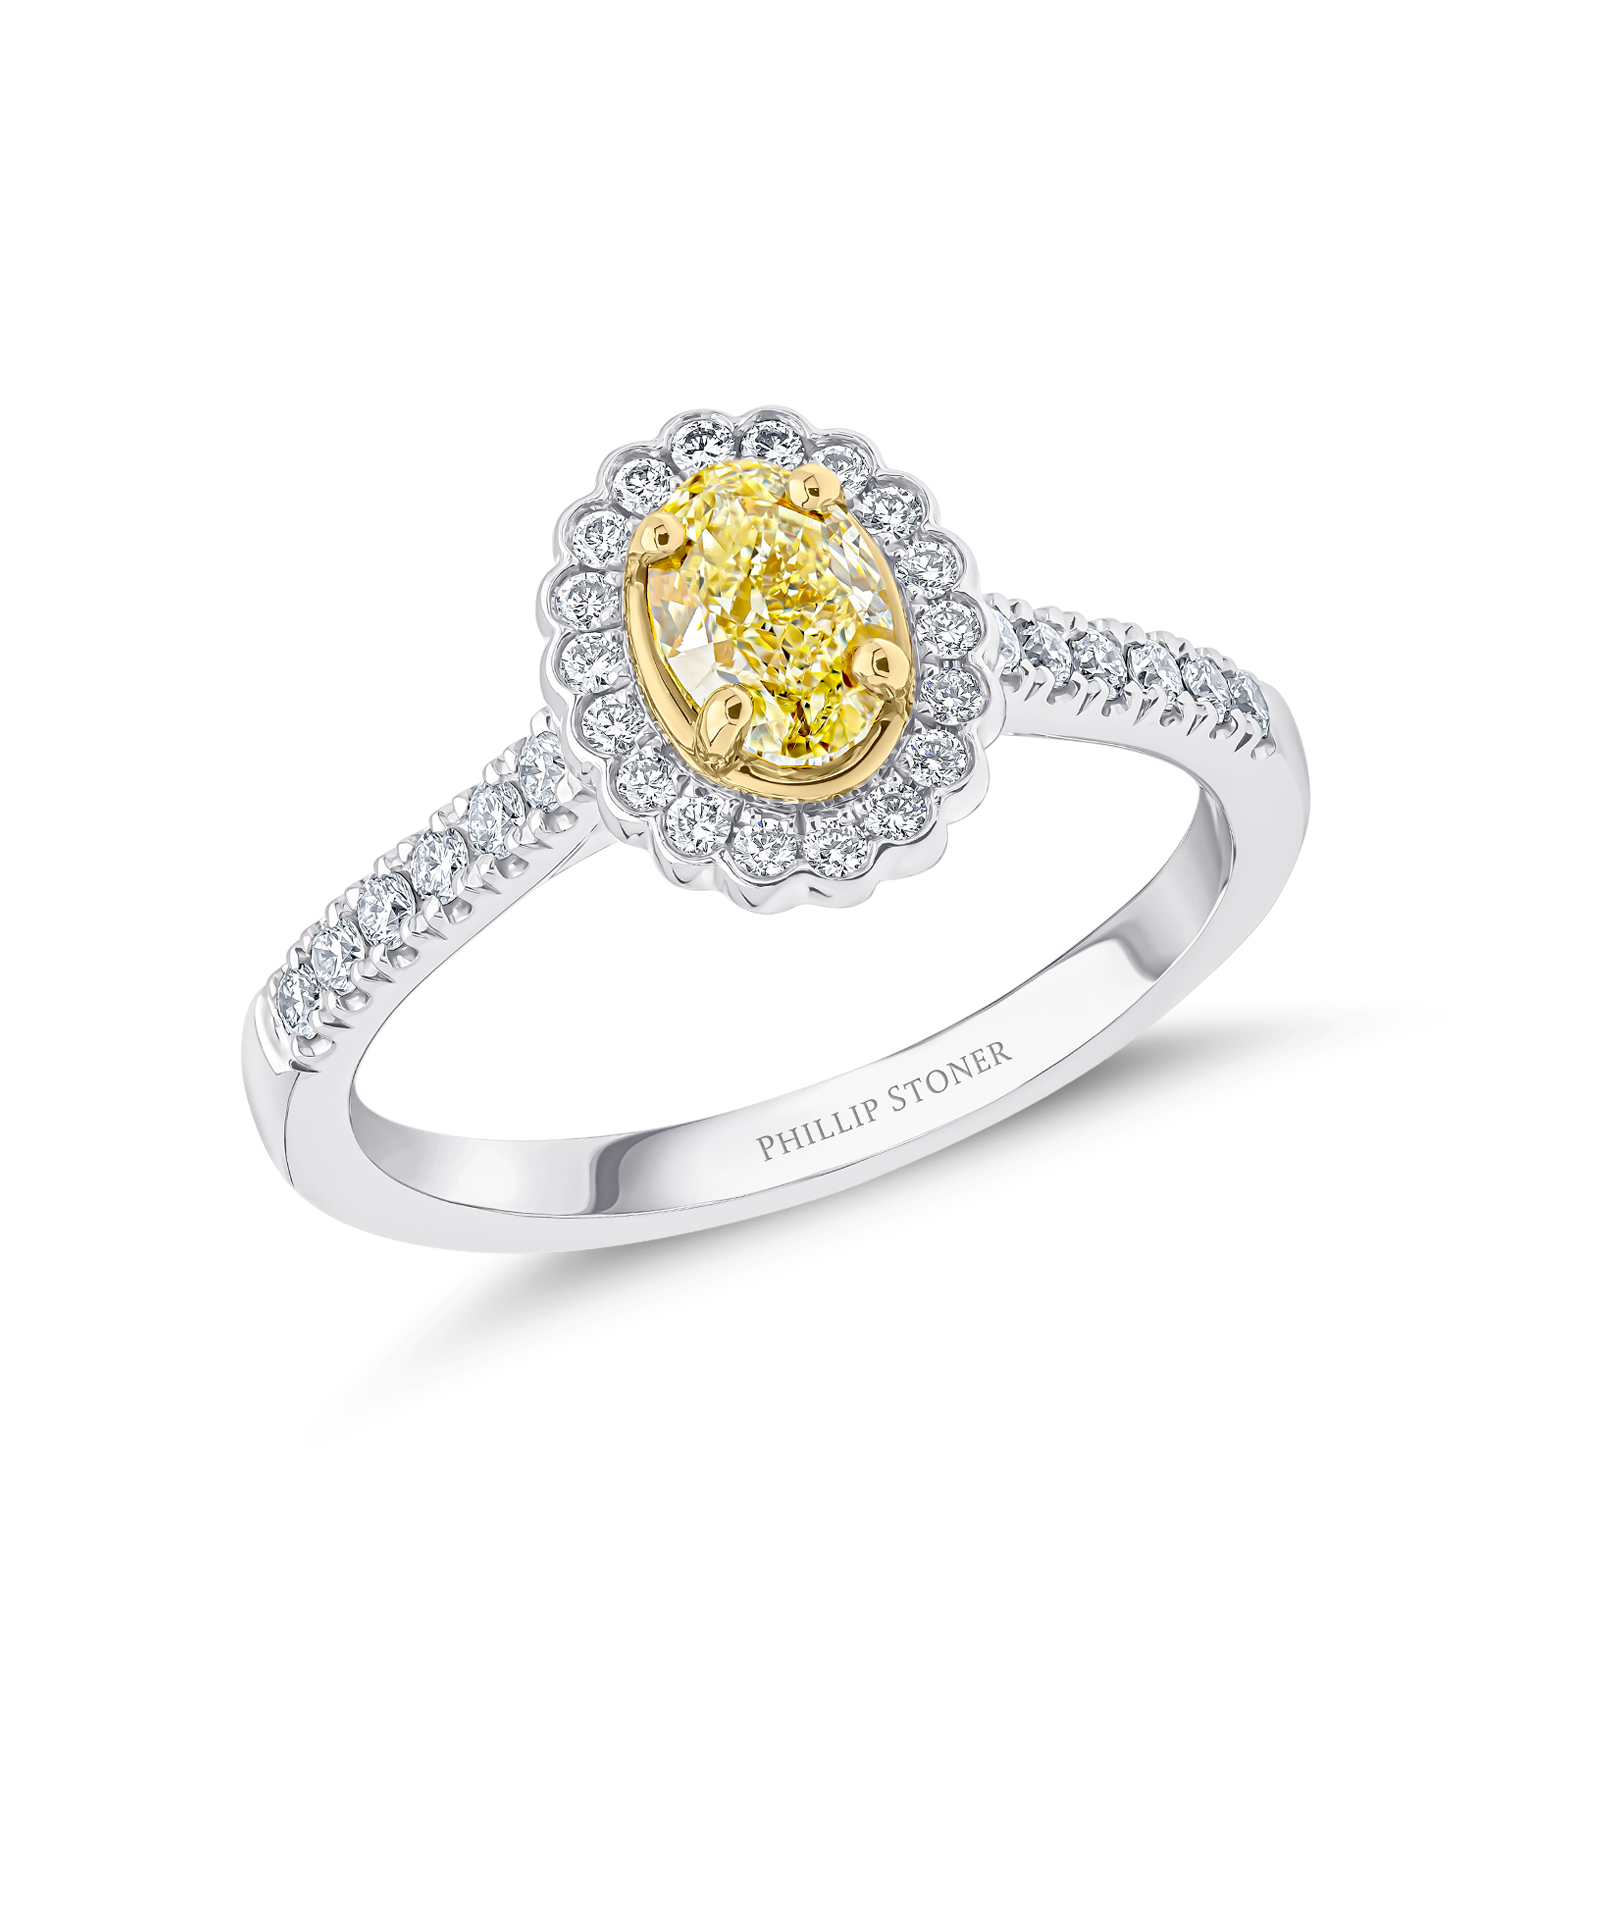 Oval Cut Yellow Diamond Cluster Engagement Ring - Phillip Stoner The Jeweller